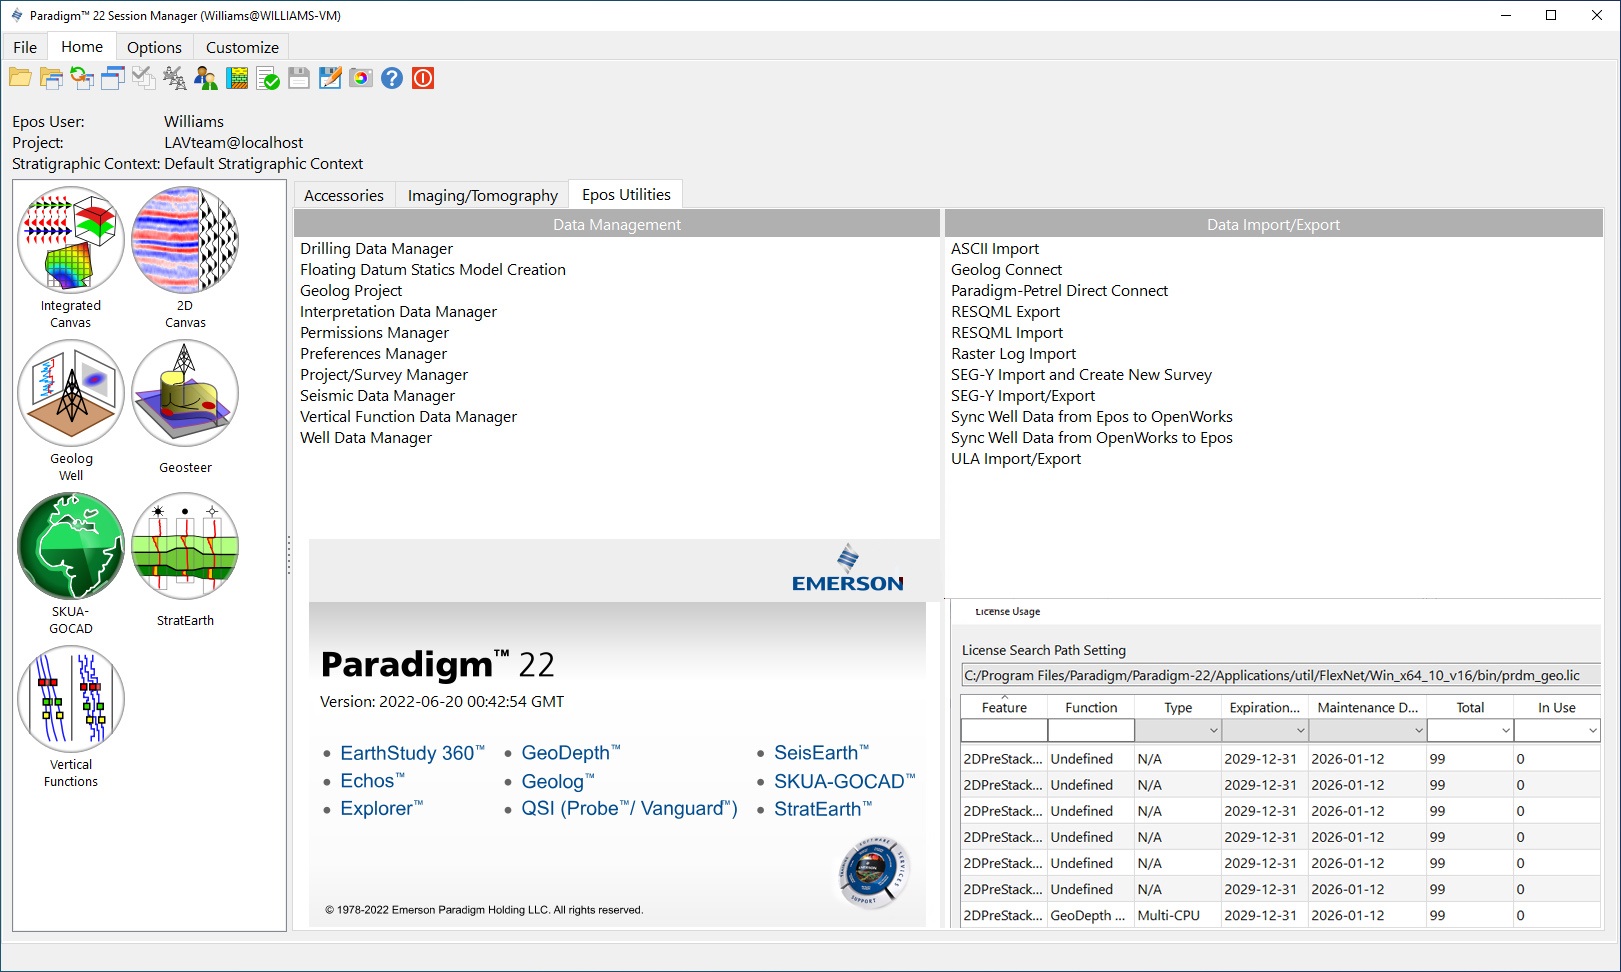 Working with Emerson Paradigm 22 build 2022.06.20 full